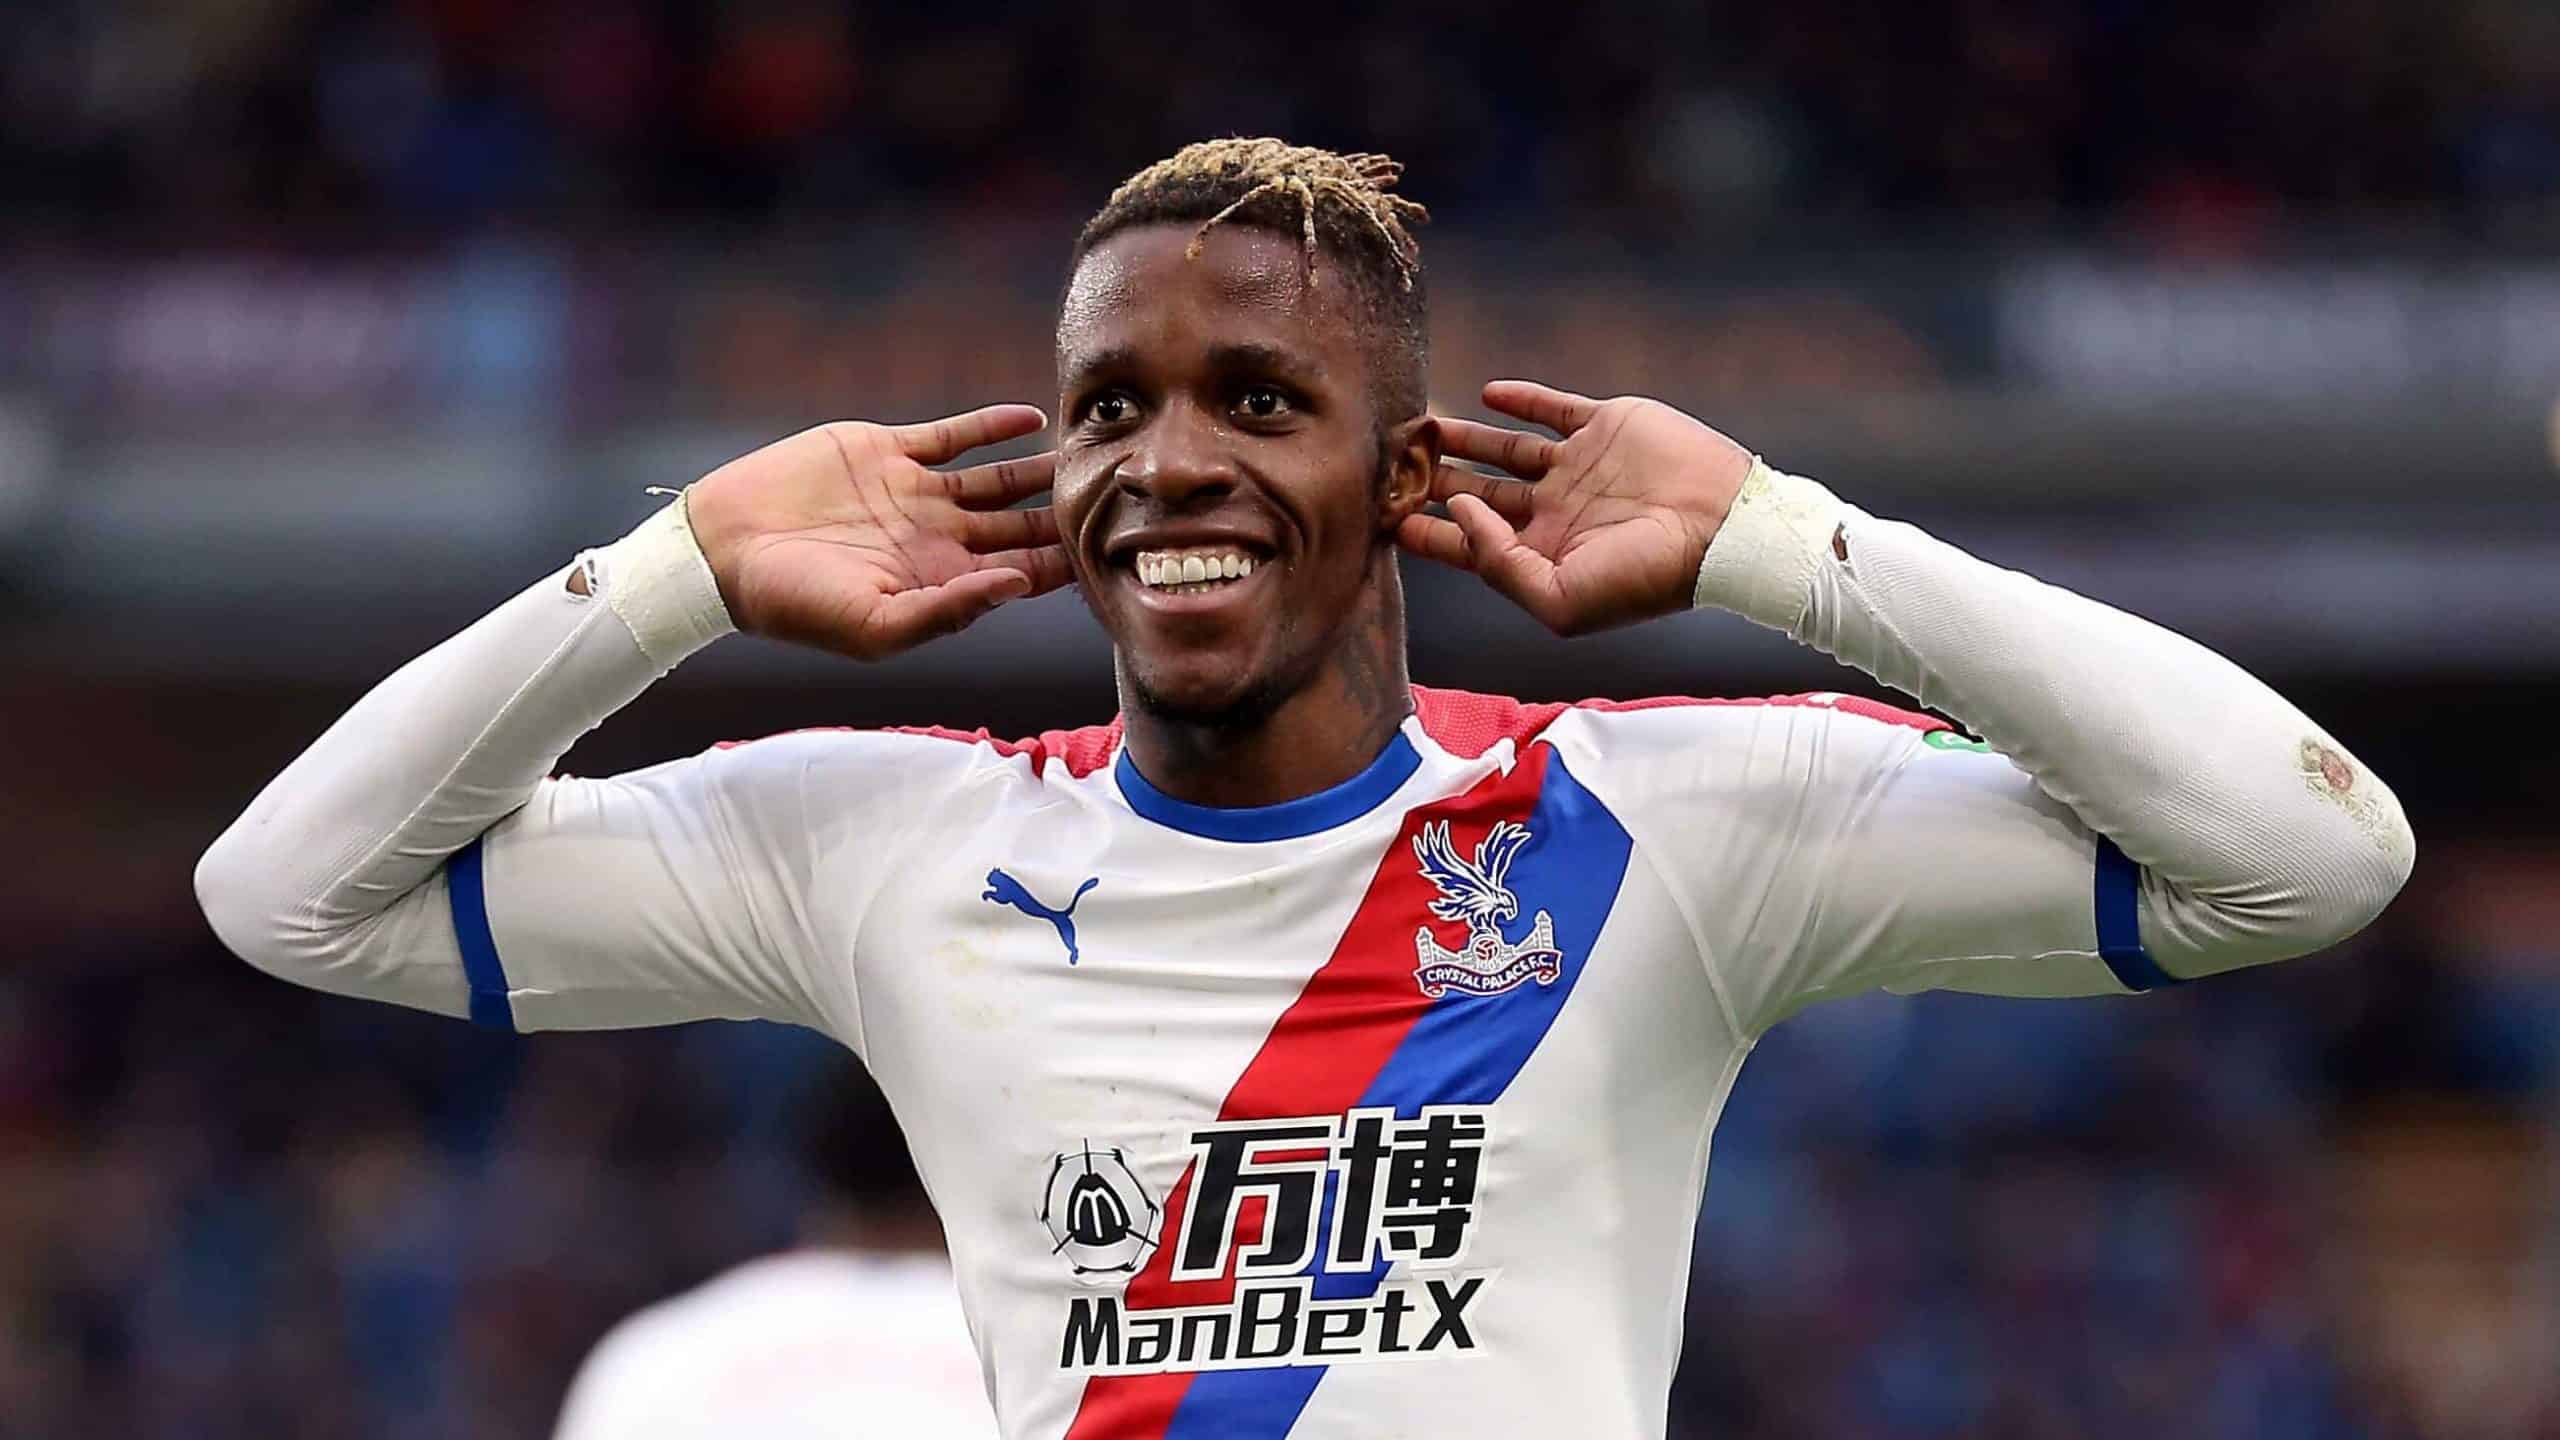 ‘In my heart of hearts, I don’t think any more players will leave’ – Crystal Palace legend hoping Zaha stays